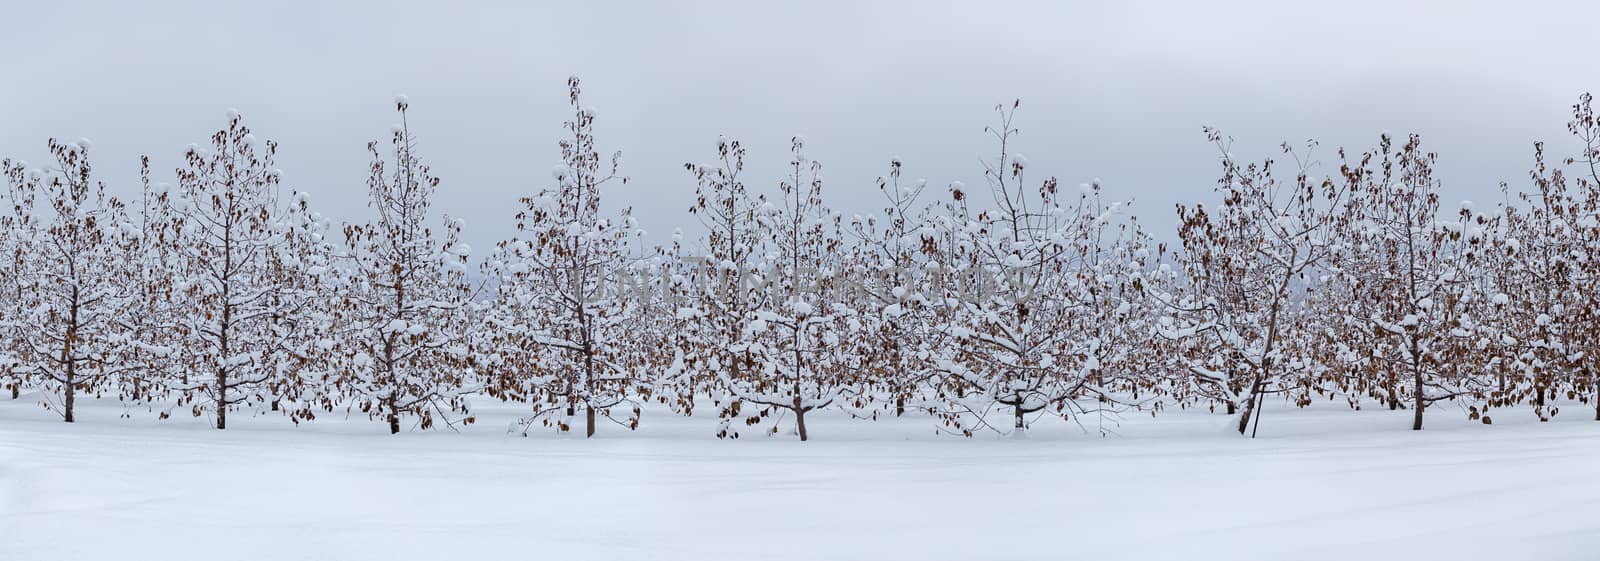 winter apple garden panorama with snow at cloudy daylight by z1b